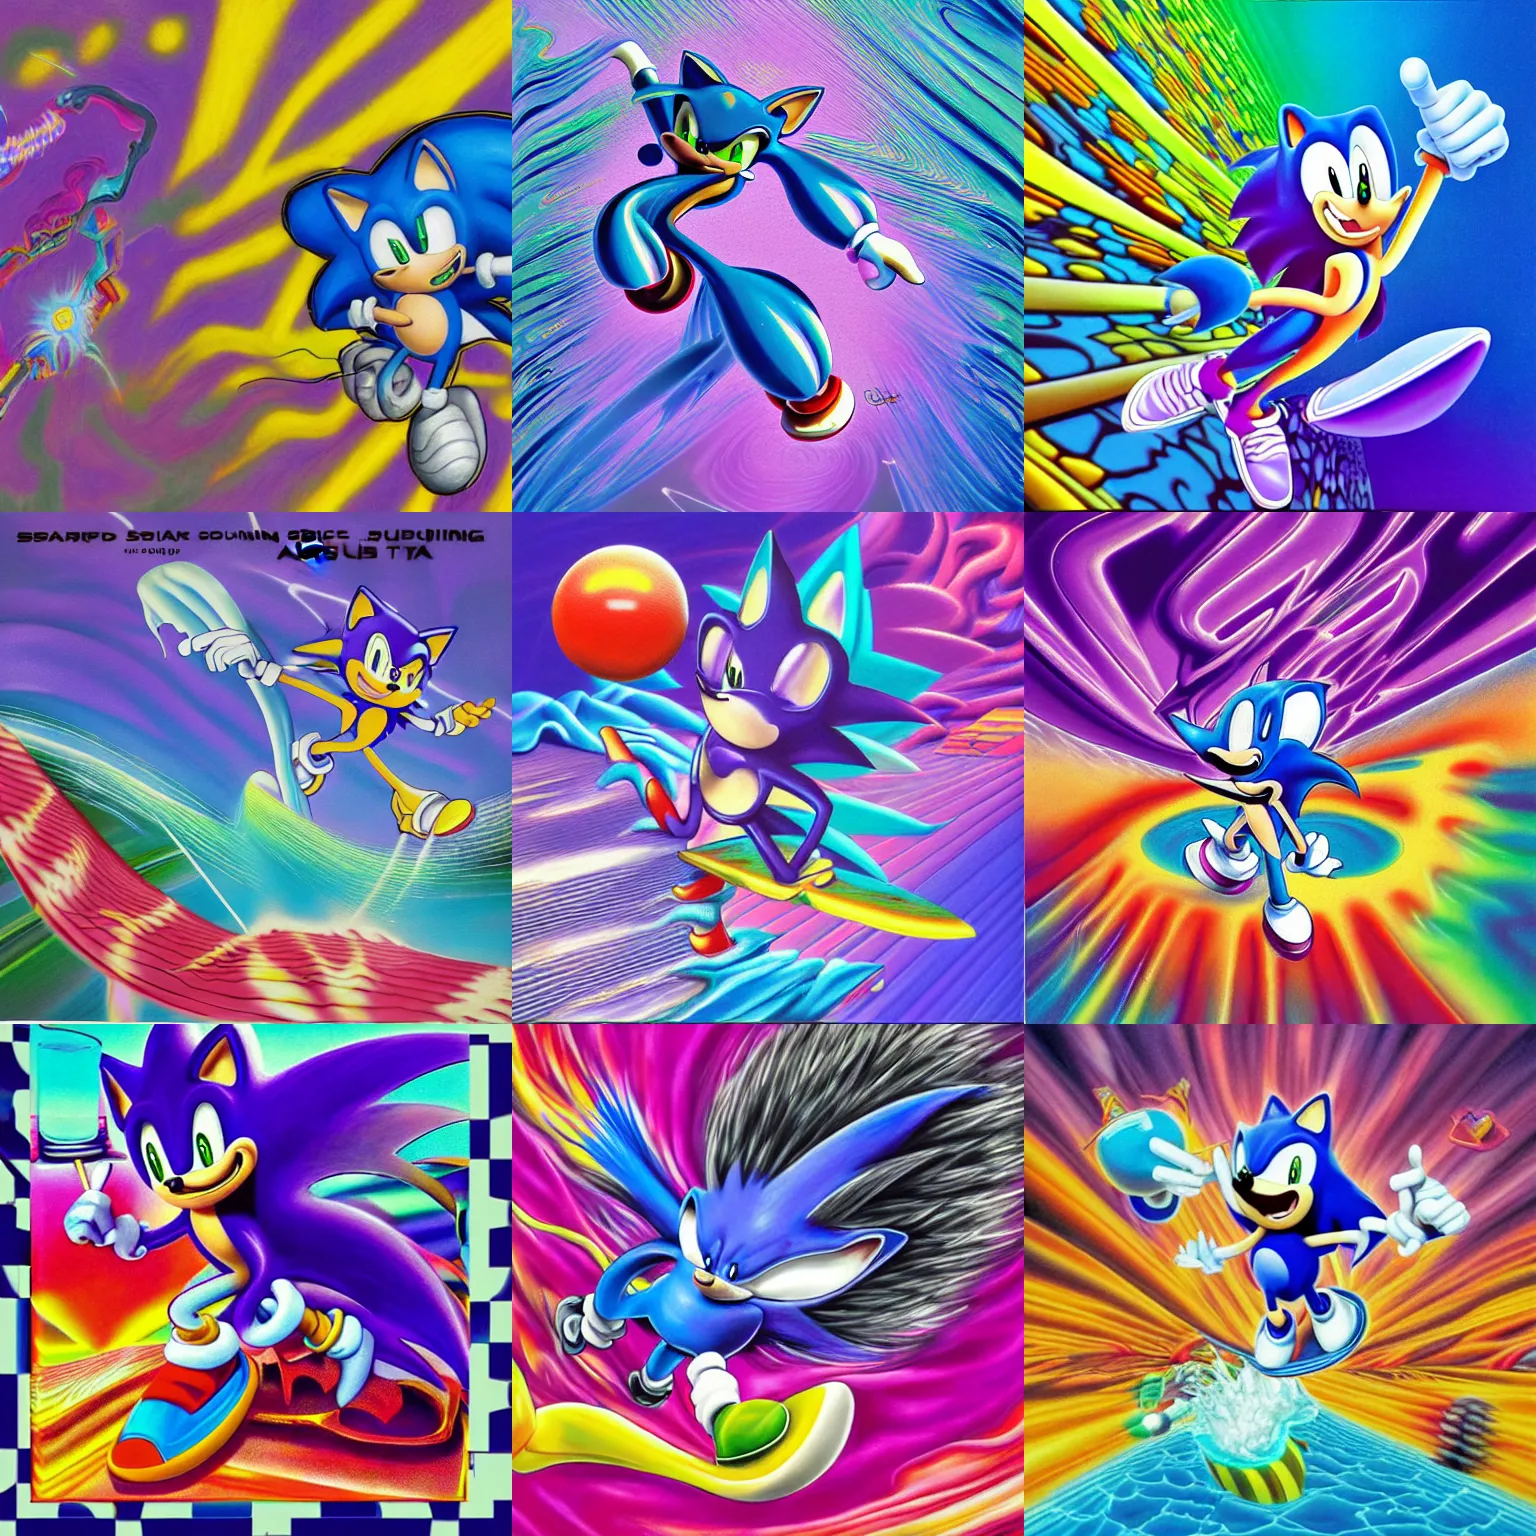 Prompt: surreal, sharp, detailed professional, soft pastels, high quality airbrush art mgmt album cover of a liquid dissolving airbrush art lsd dmt sonic the hedgehog surfing through cyberspace, purple checkerboard background, 1 9 9 0 s 1 9 9 2 sega genesis rareware video game album cover